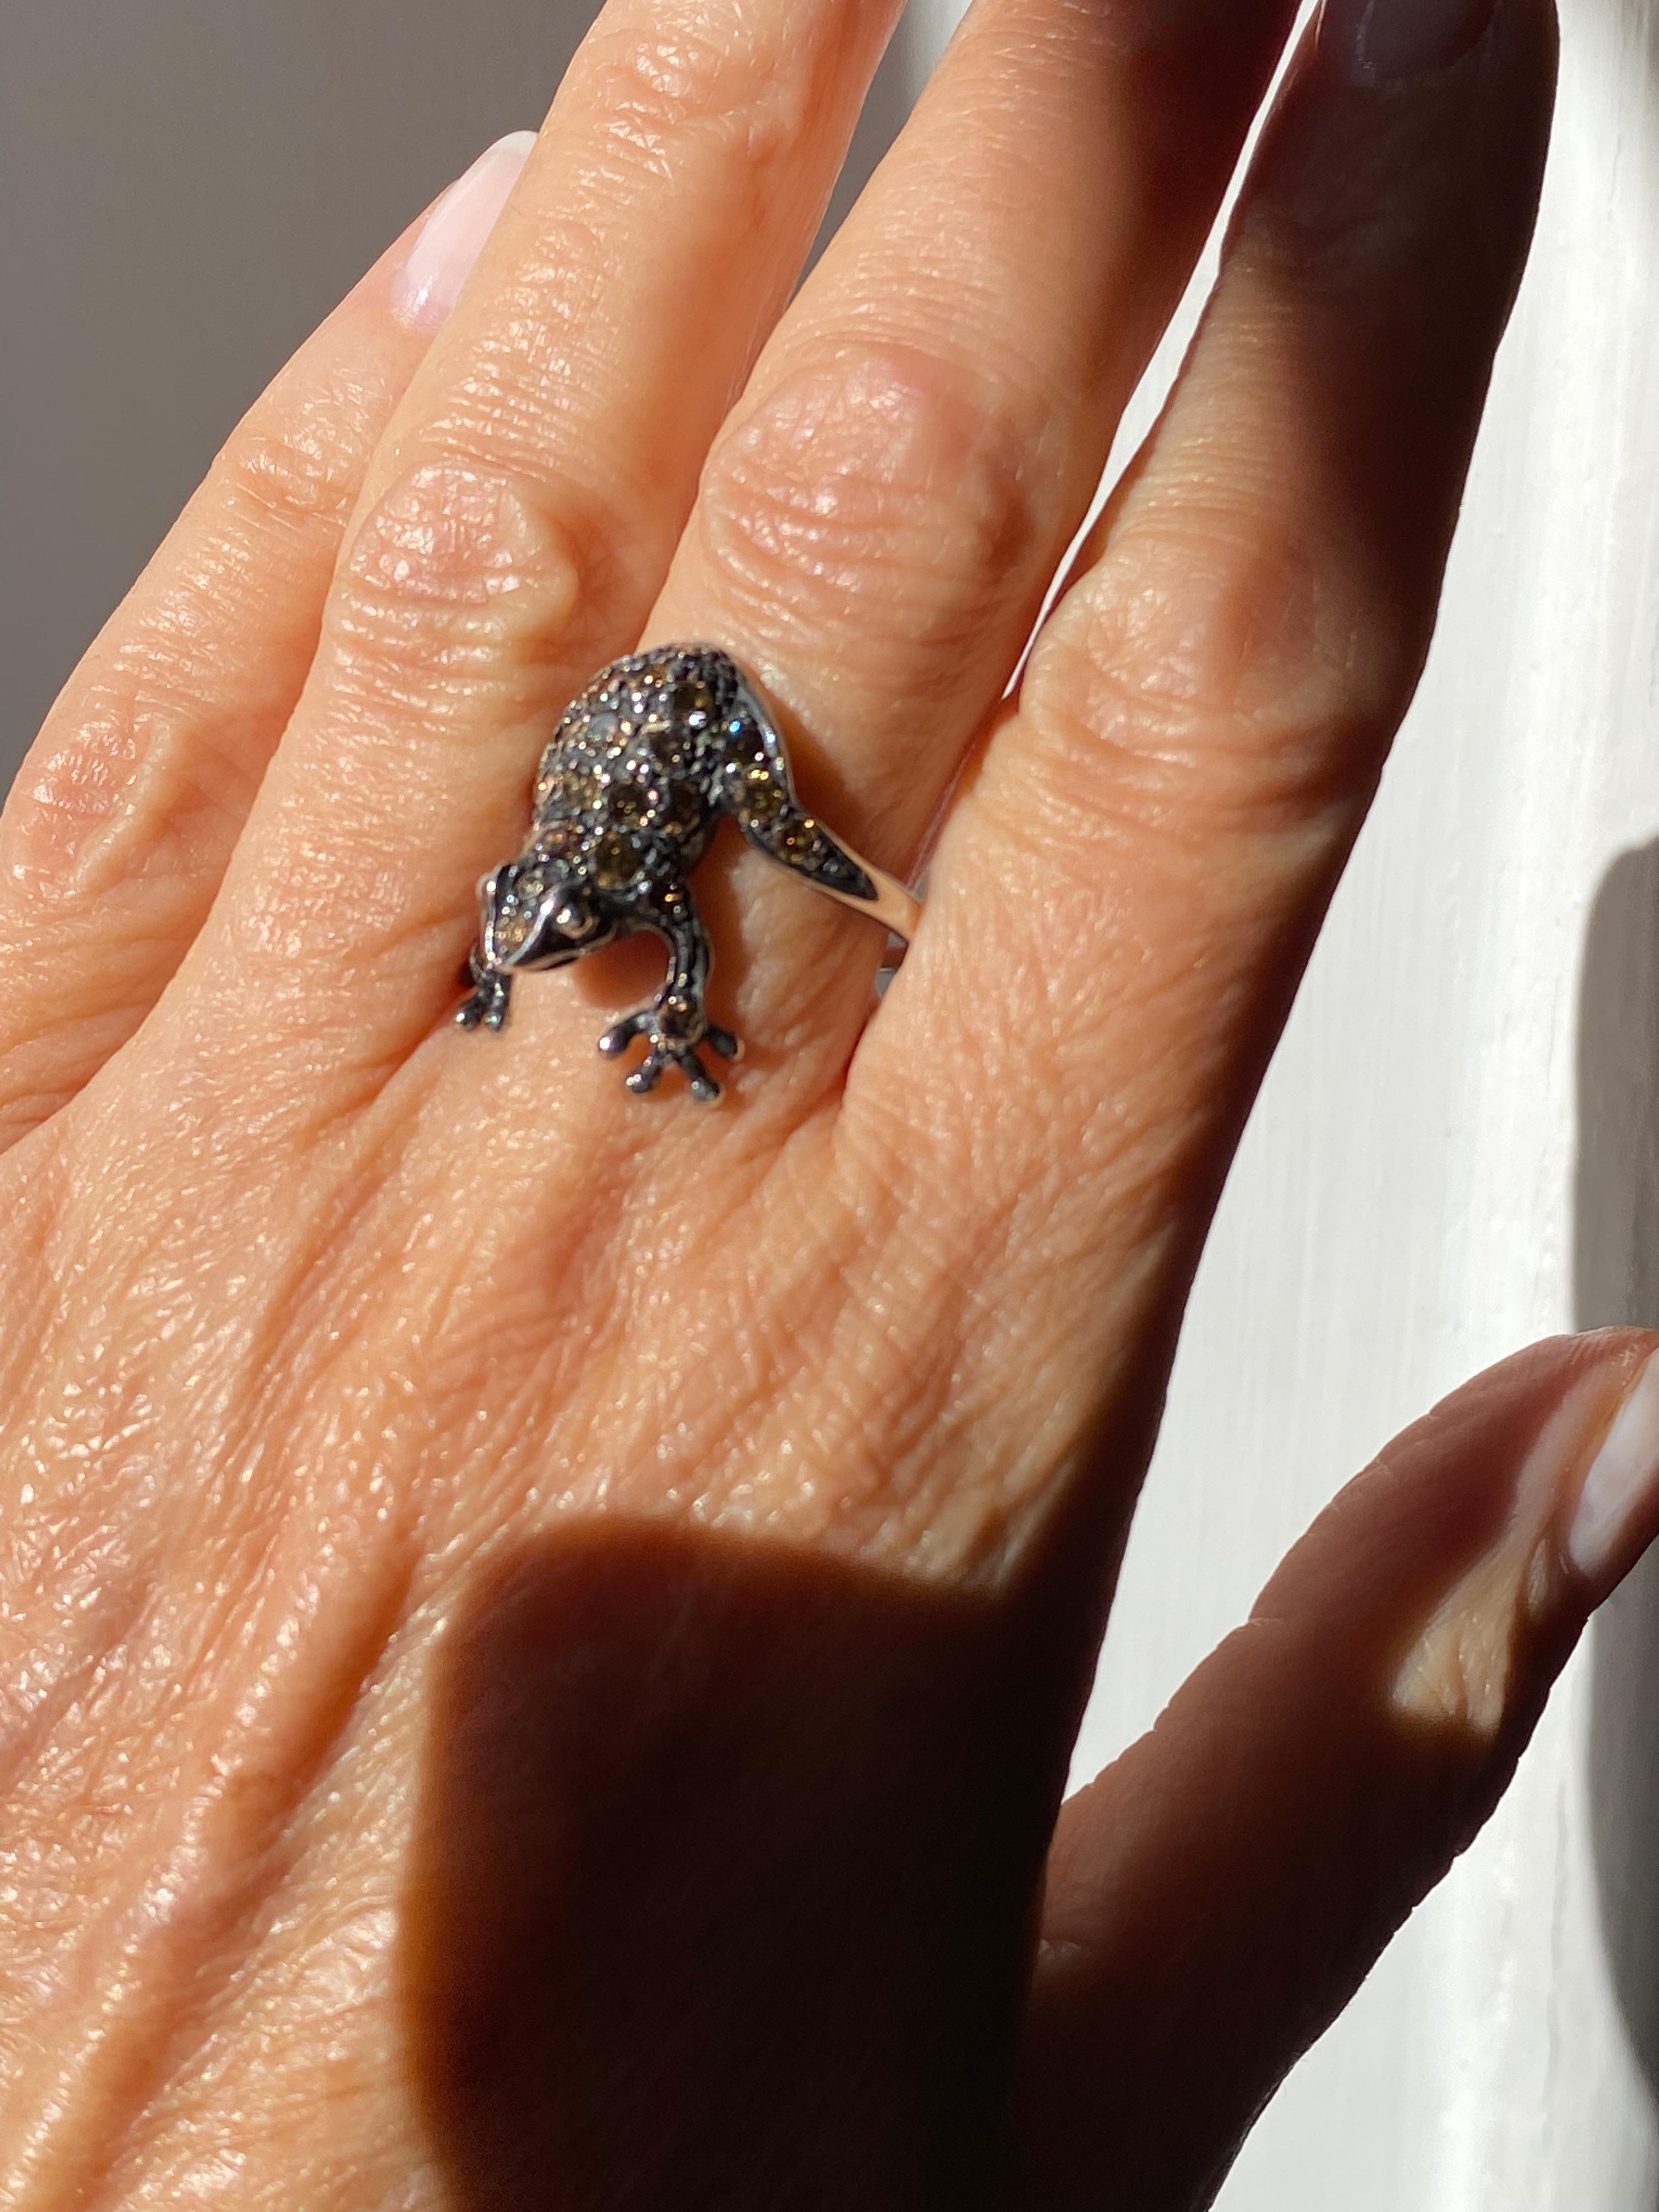 Rossella Ugolini design animal collection 18 karats white black rhodium gold Frog design ring
A beautiful cocktail ring handcrafted in 18 karats white gold and enriched with brilliant cut brown diamonds.
Available in two weeks by order also in